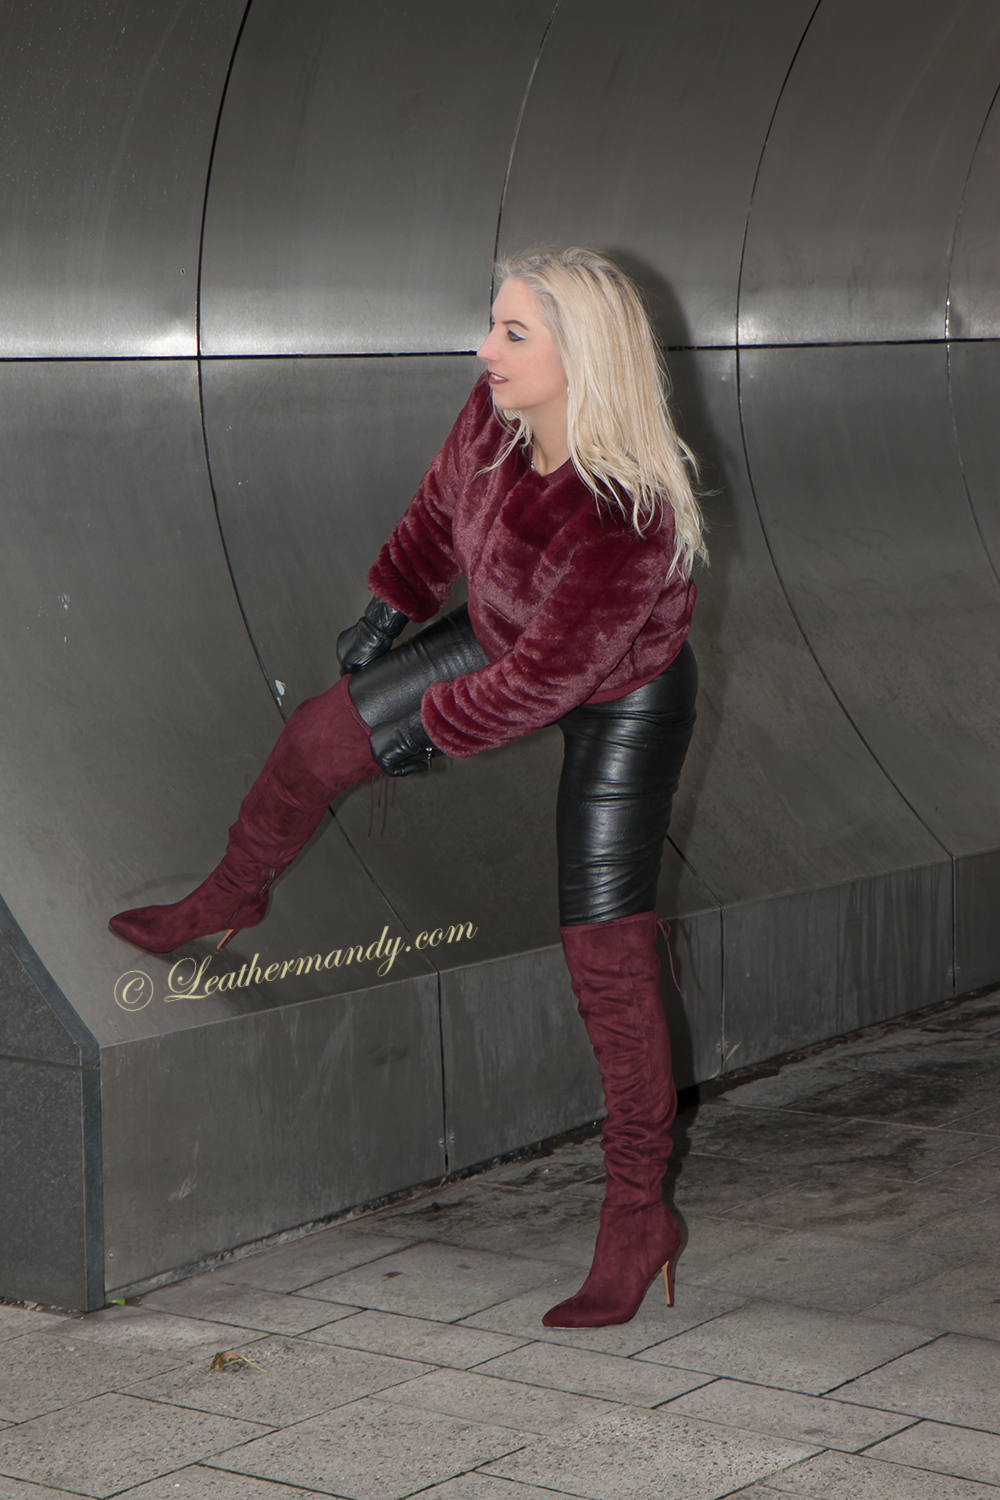 Leathermandy Preview Bild Gallery 584